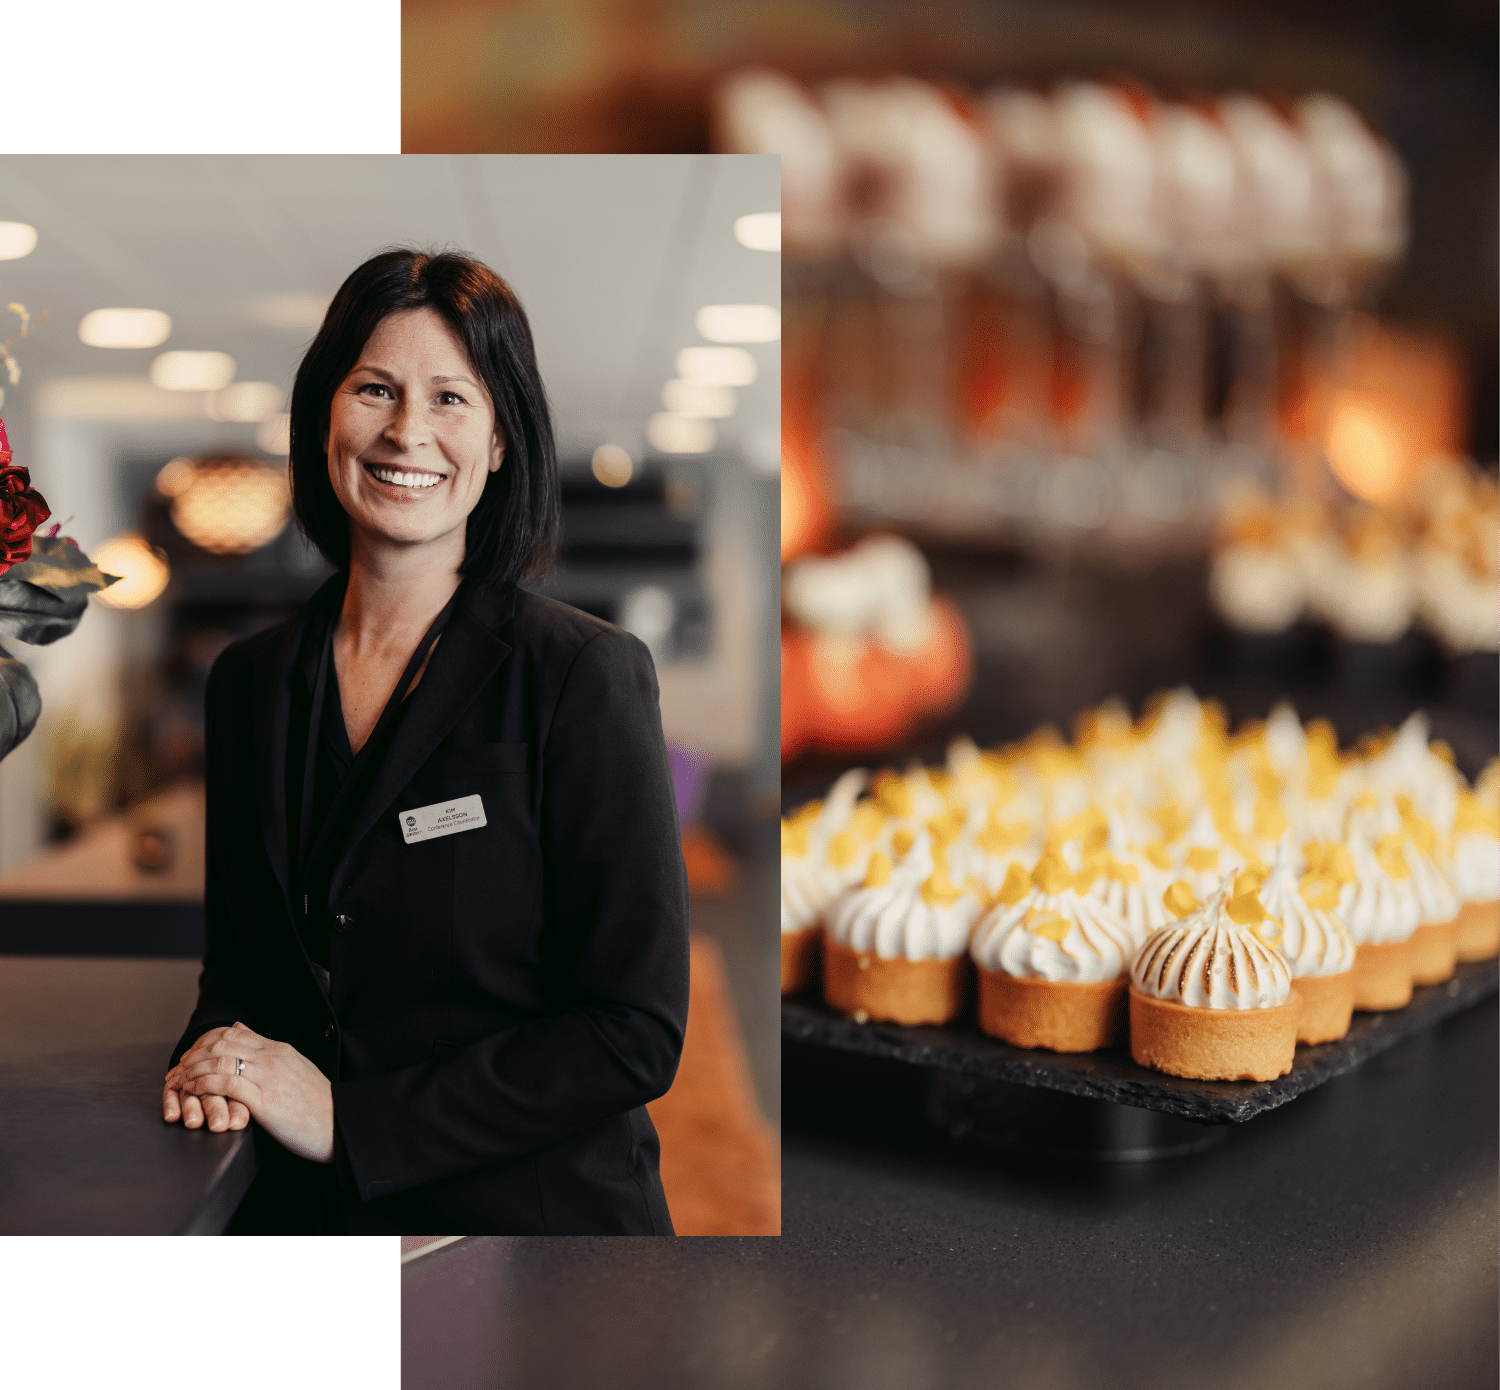 A woman with a welcoming smile in a black blazer for a conference in front of a collection of delicious lemon meringue pastries.